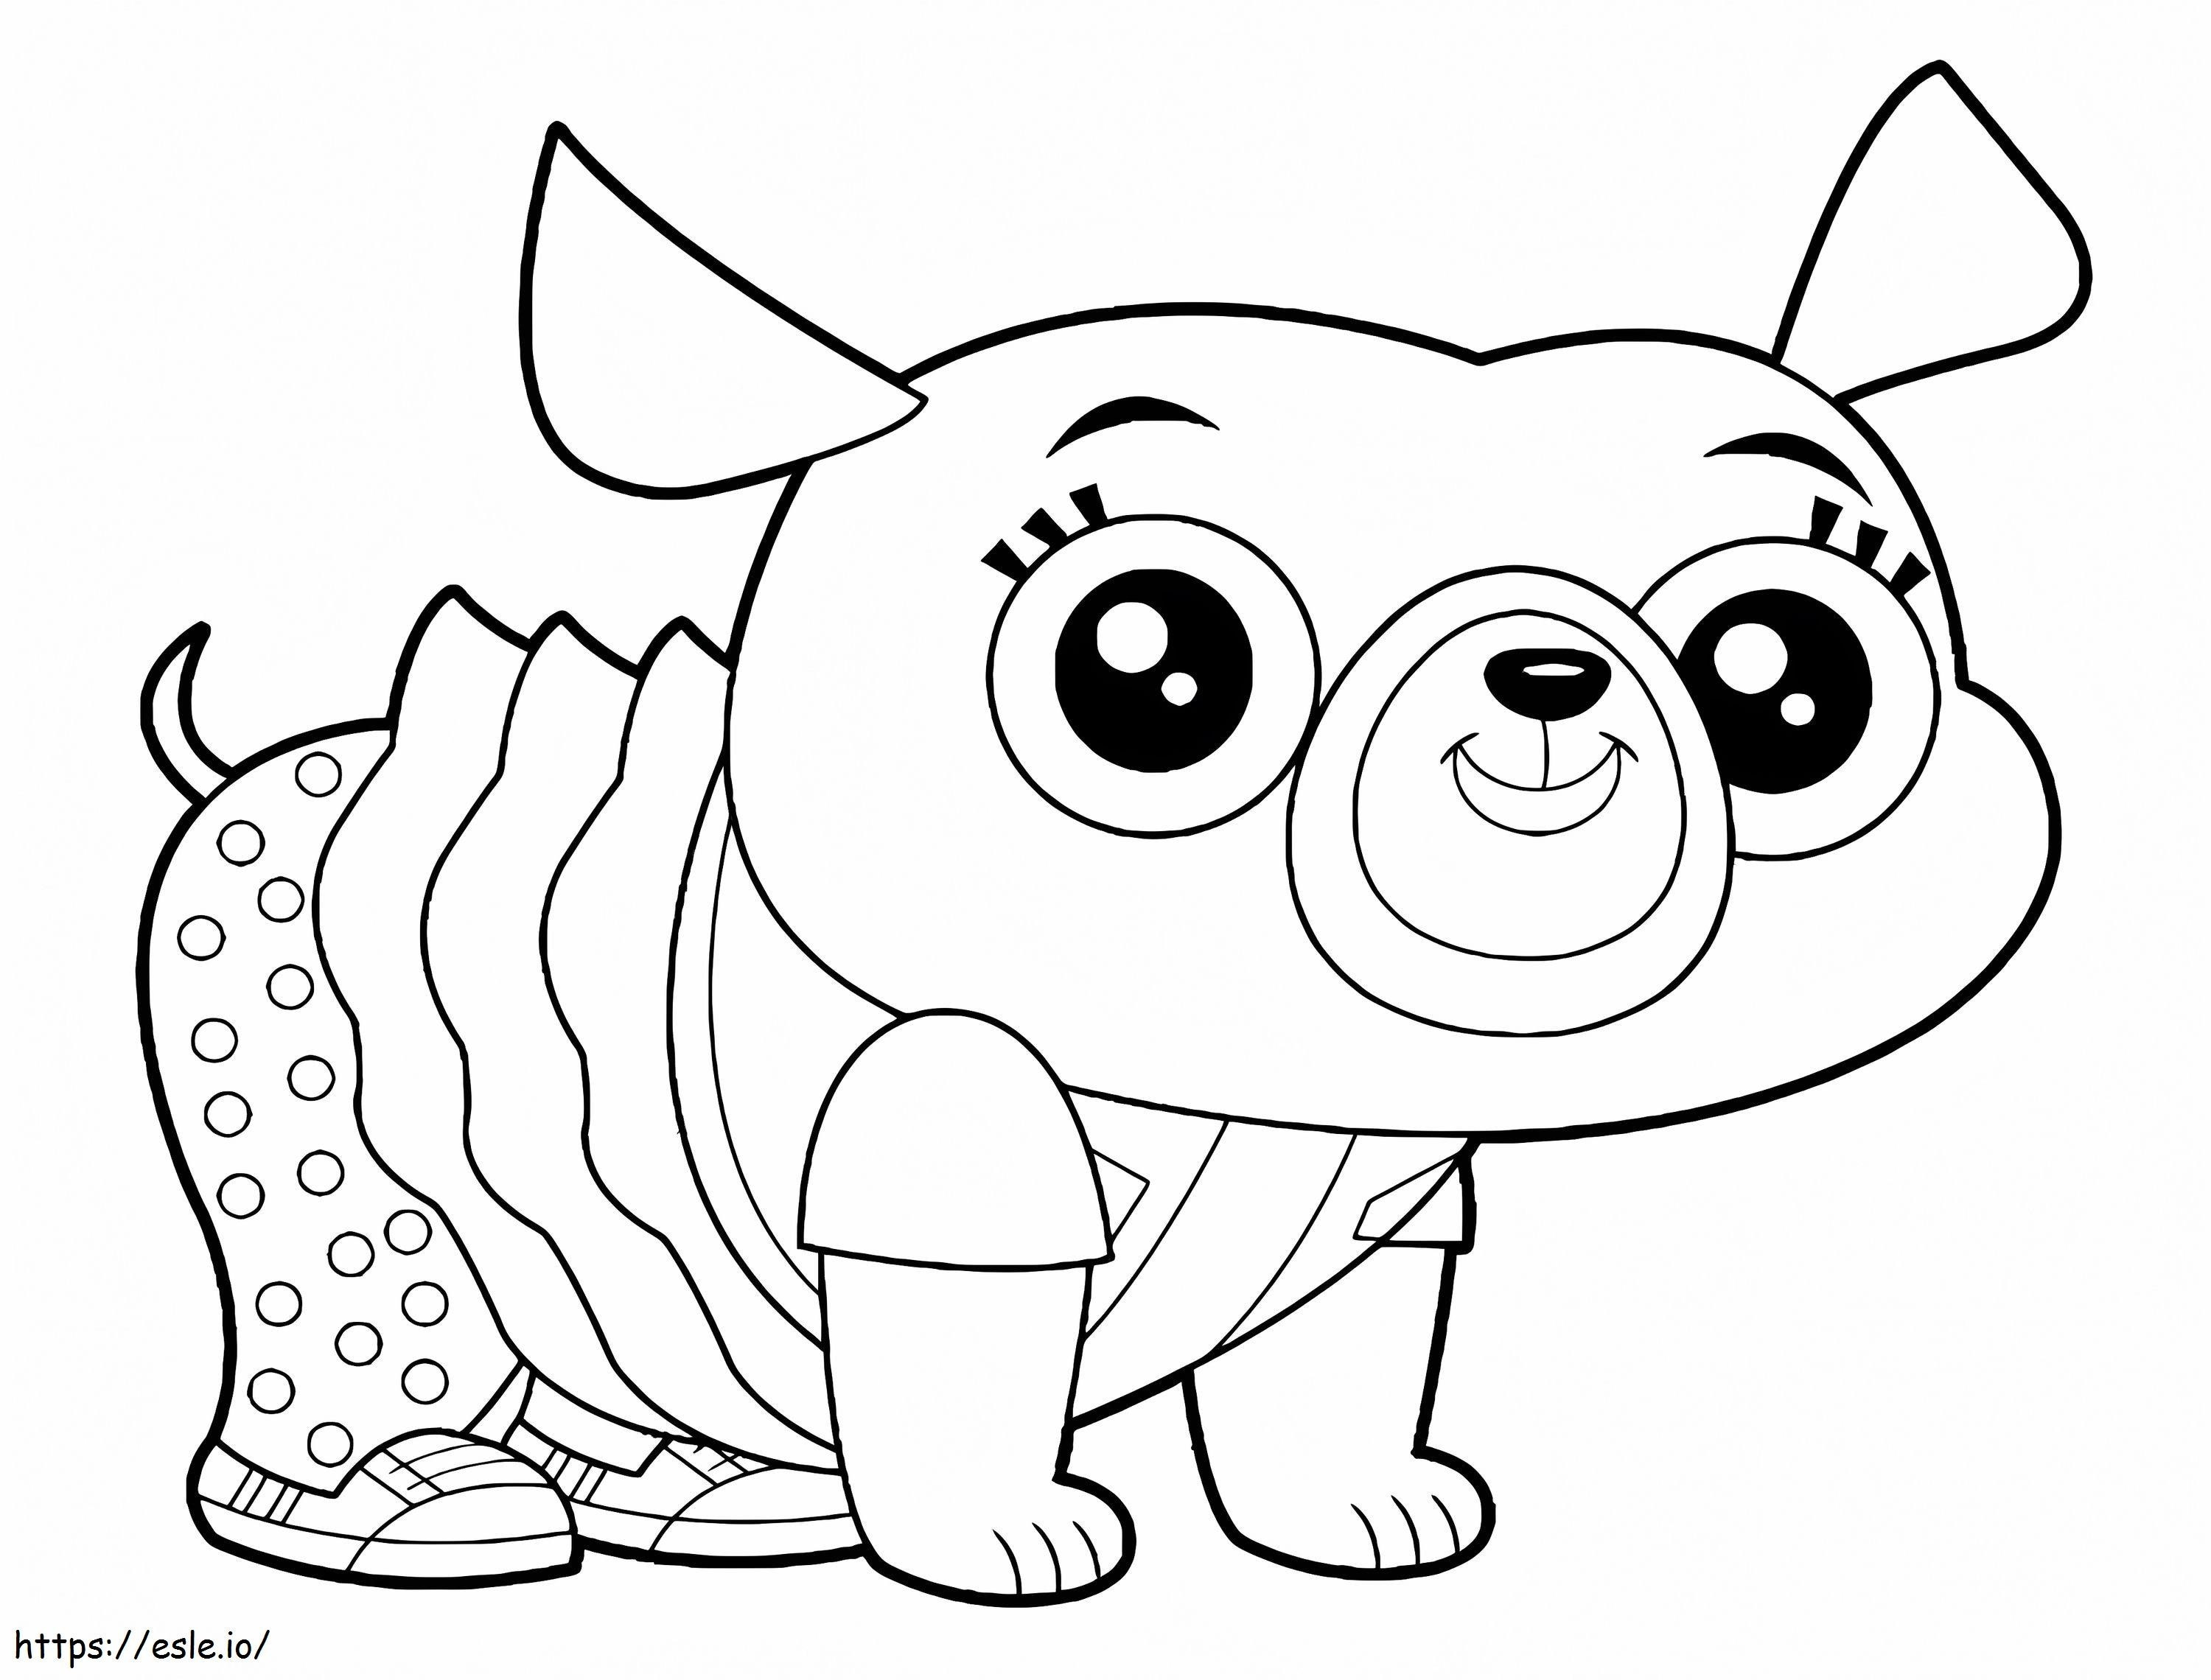 Cute Chip coloring page